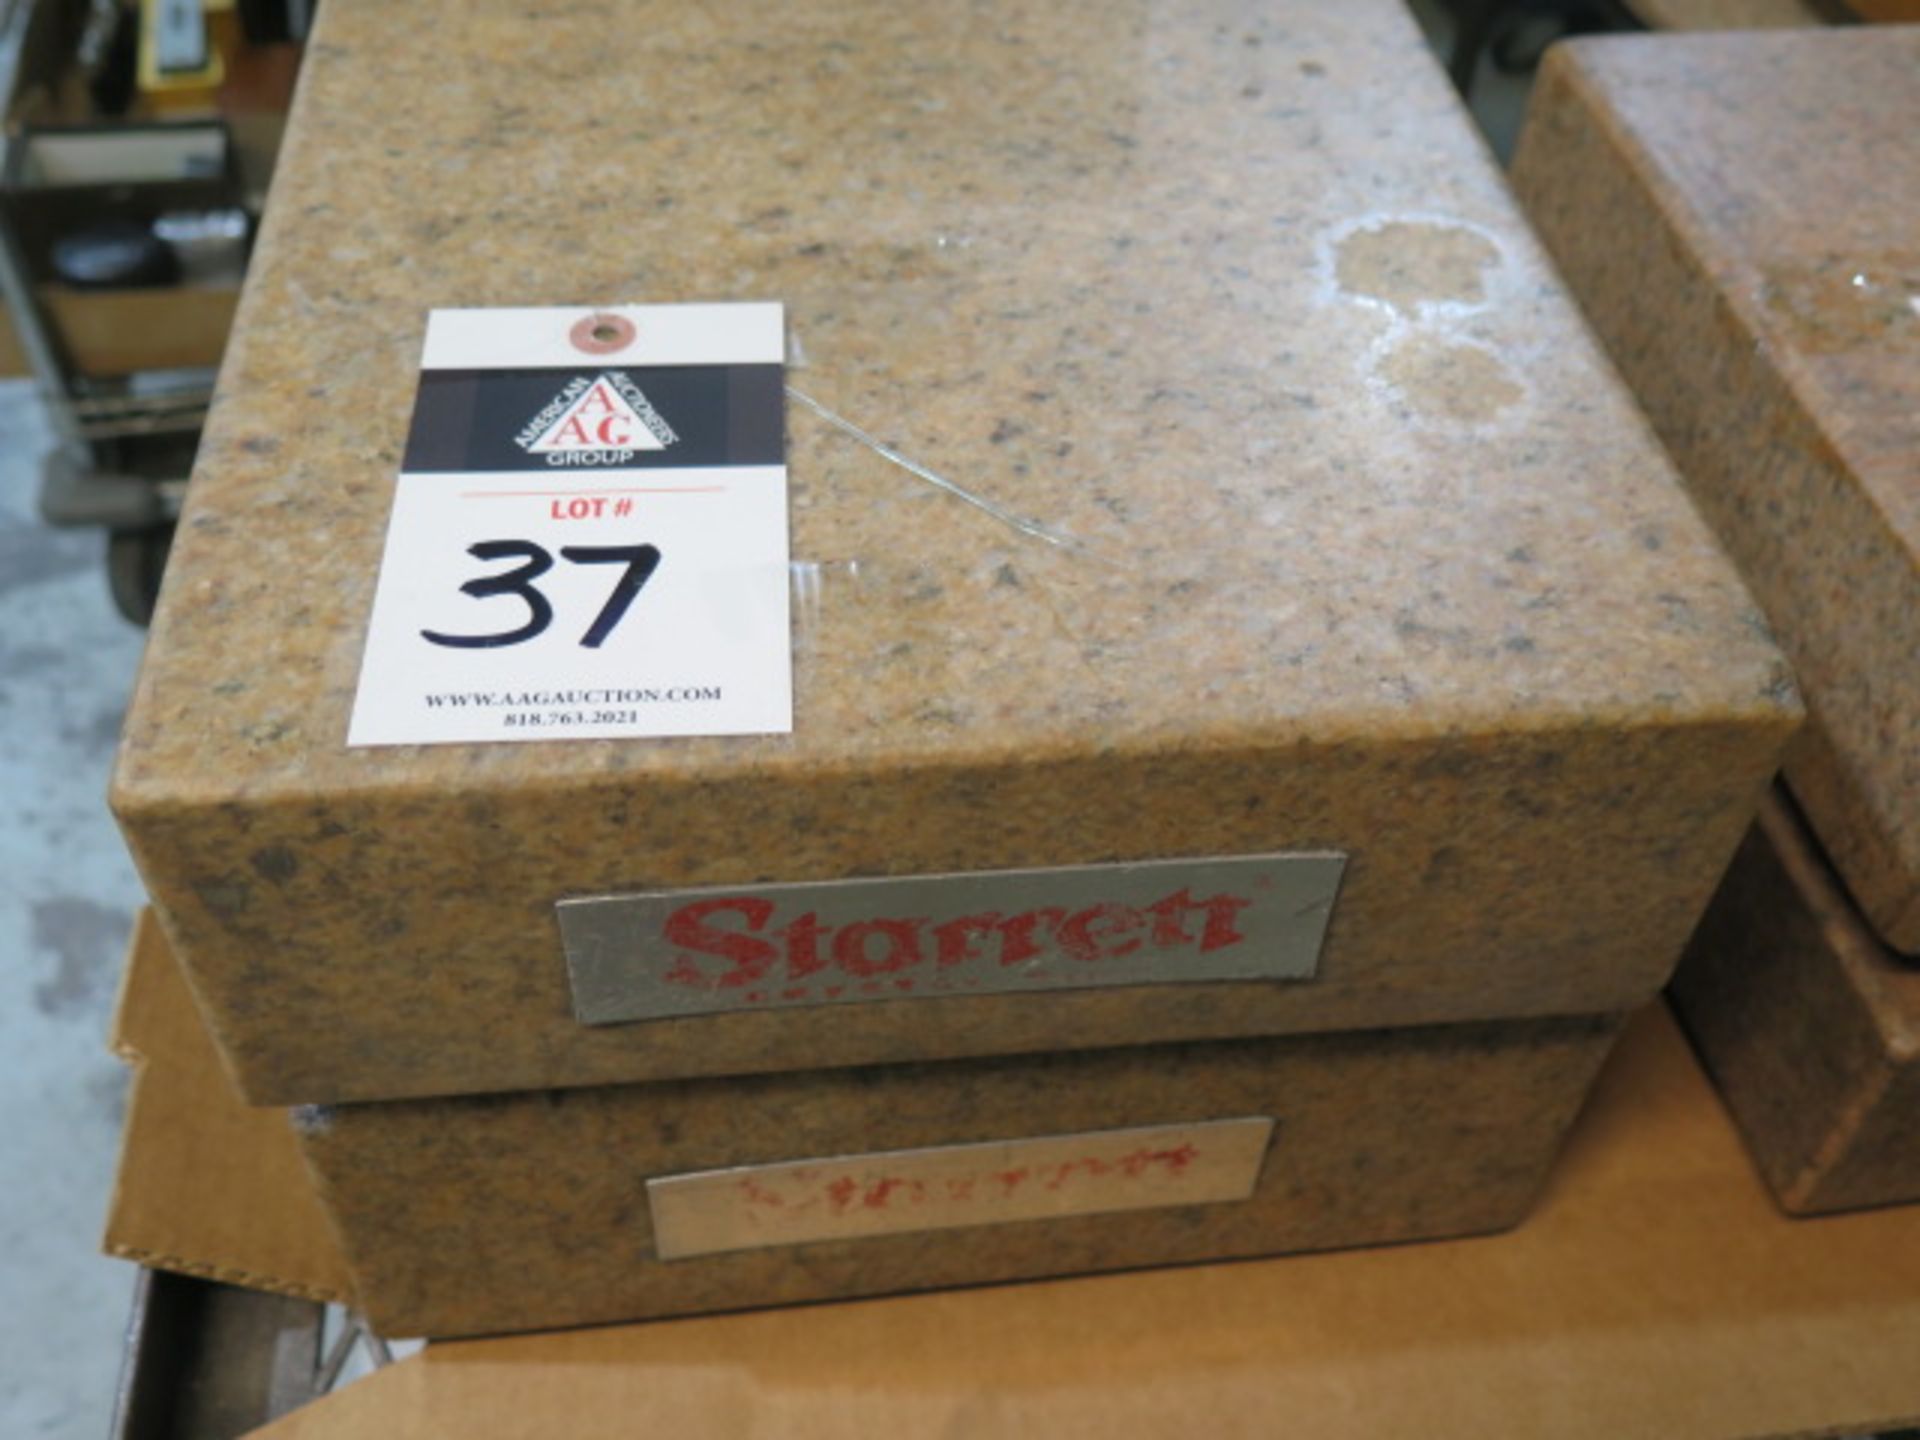 Starrett Crystal Pink 12" x 12" x 4" Granite Surface Plates (2) (NO STAND) (SOLD AS-IS - NO